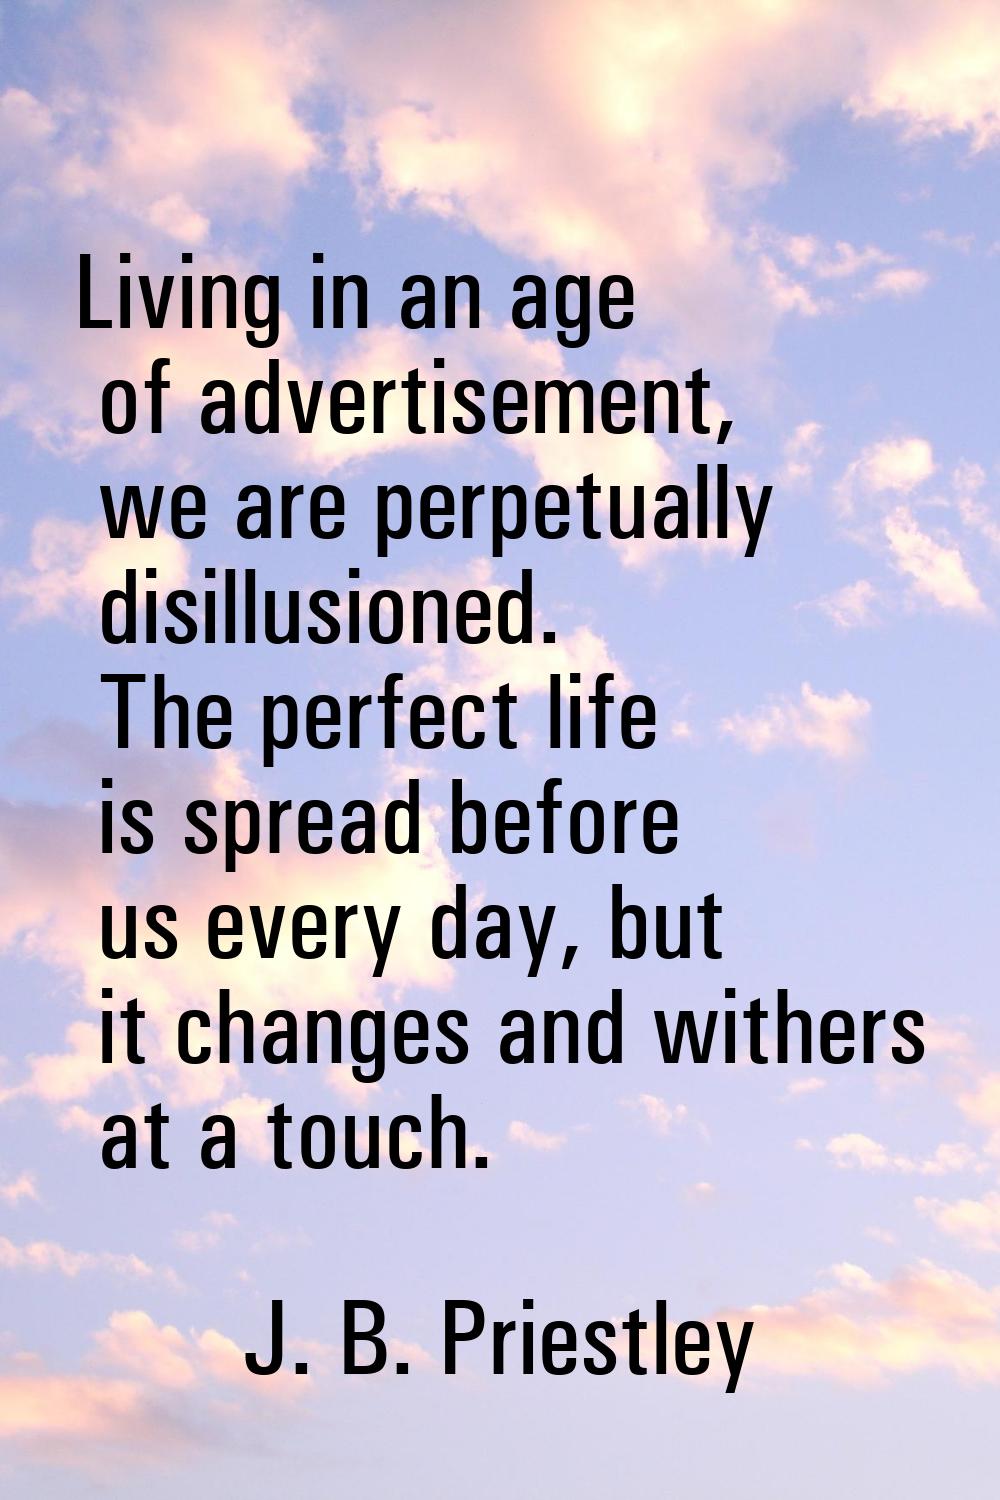 Living in an age of advertisement, we are perpetually disillusioned. The perfect life is spread bef